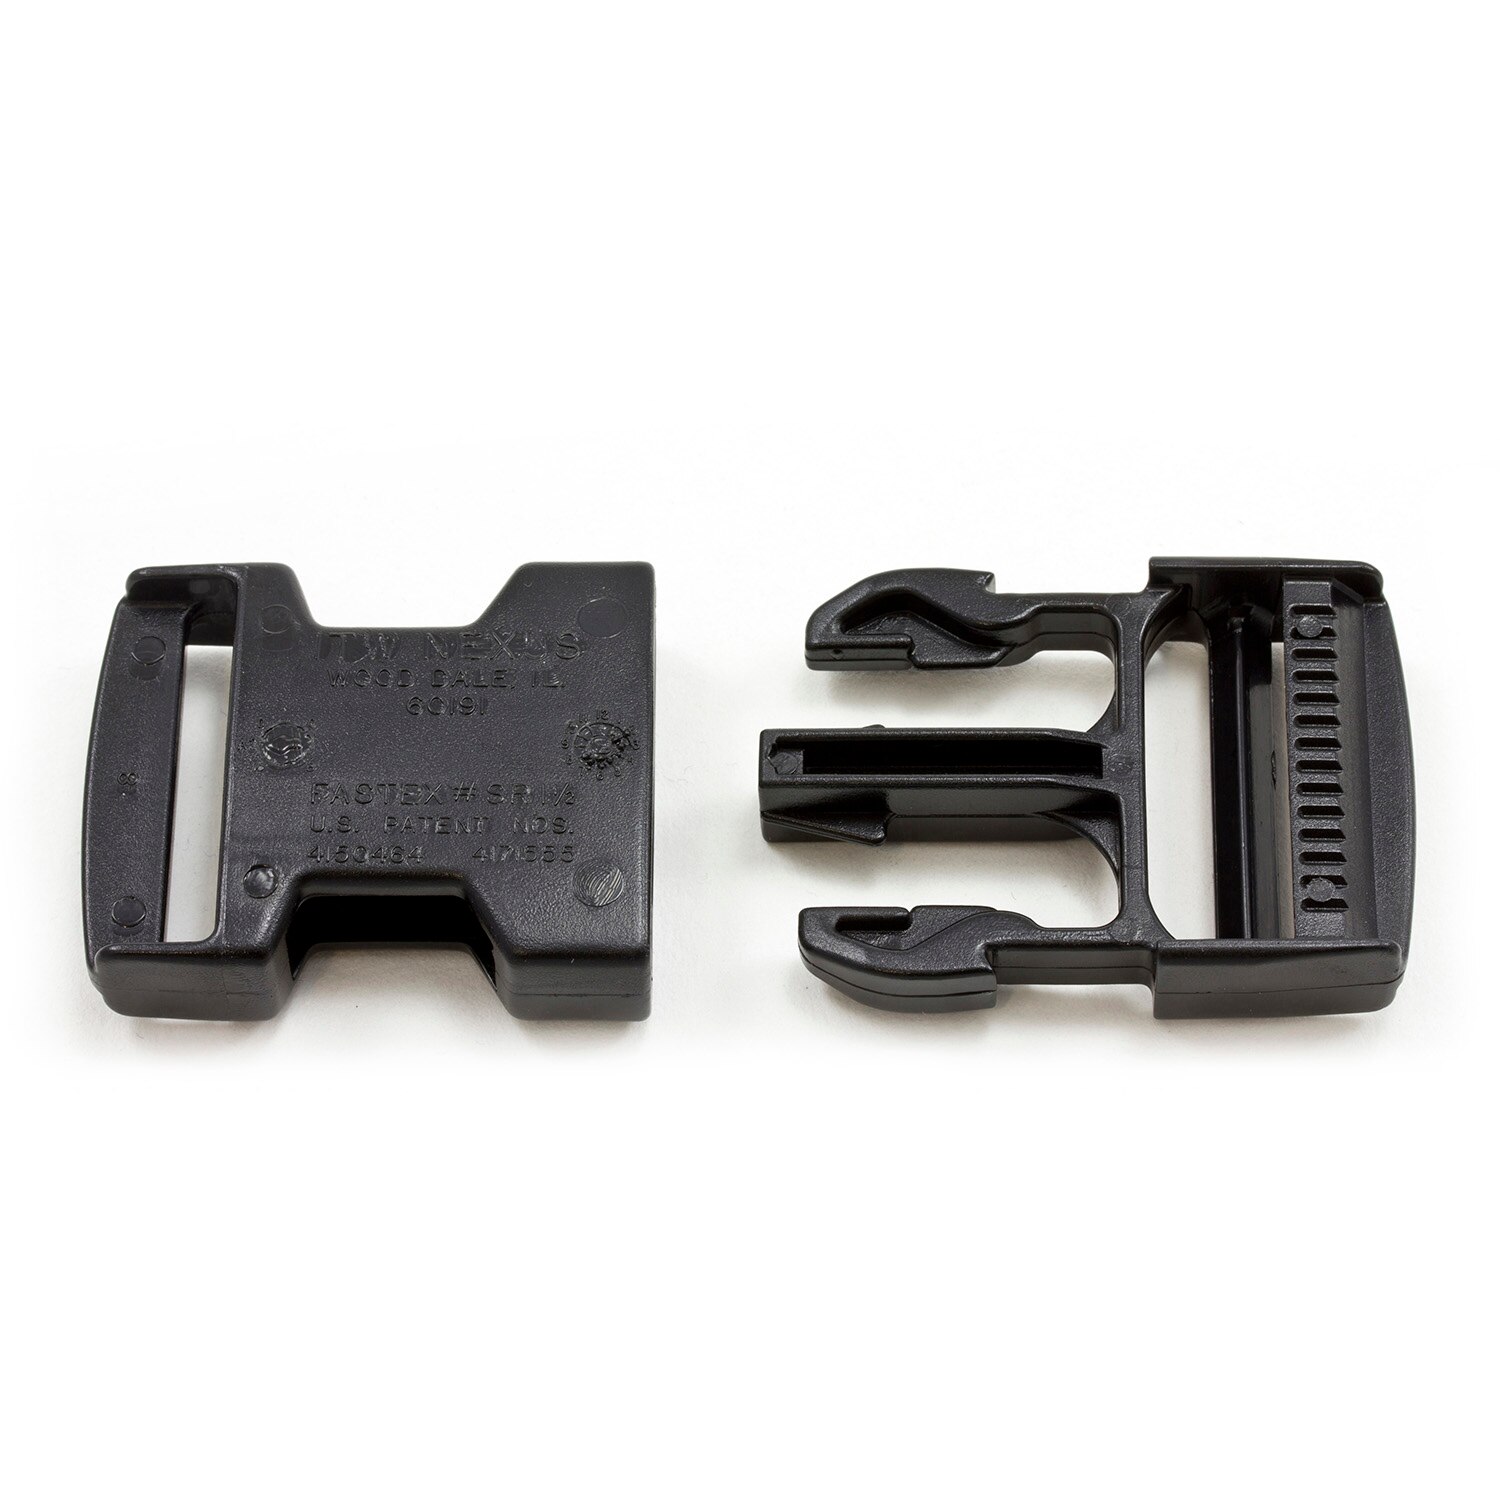 Side Squeeze Buckle, 1.5 Inch Plastic Buckles, 1 inch Plastic